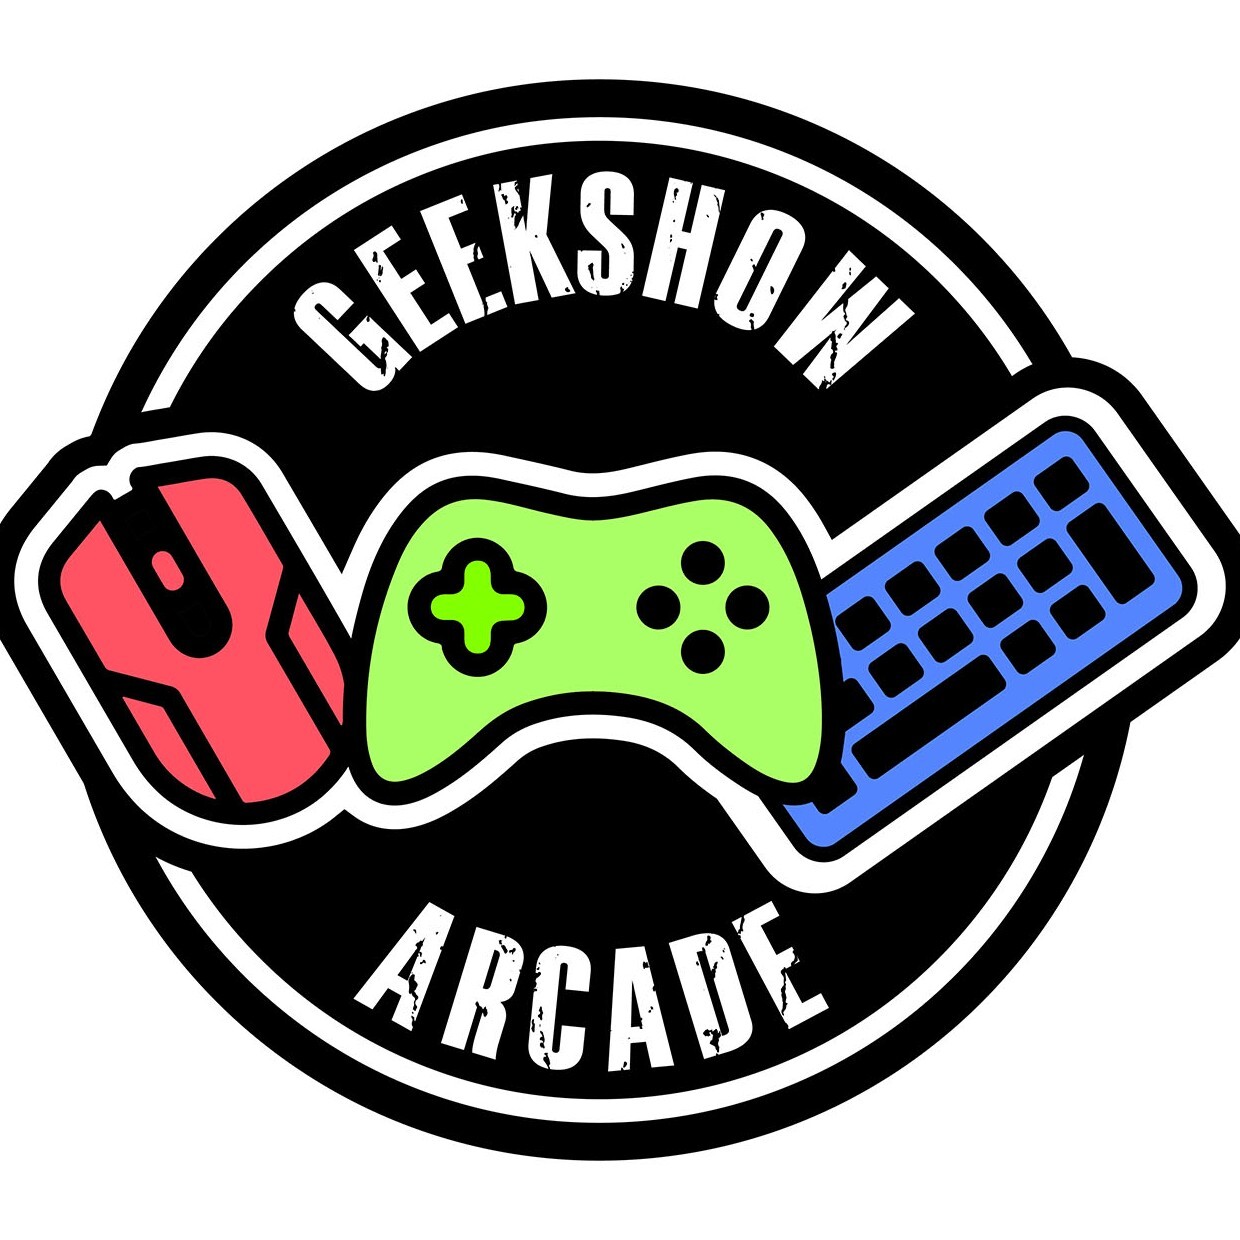 Geekshow Arcade: There’s bad news and good news